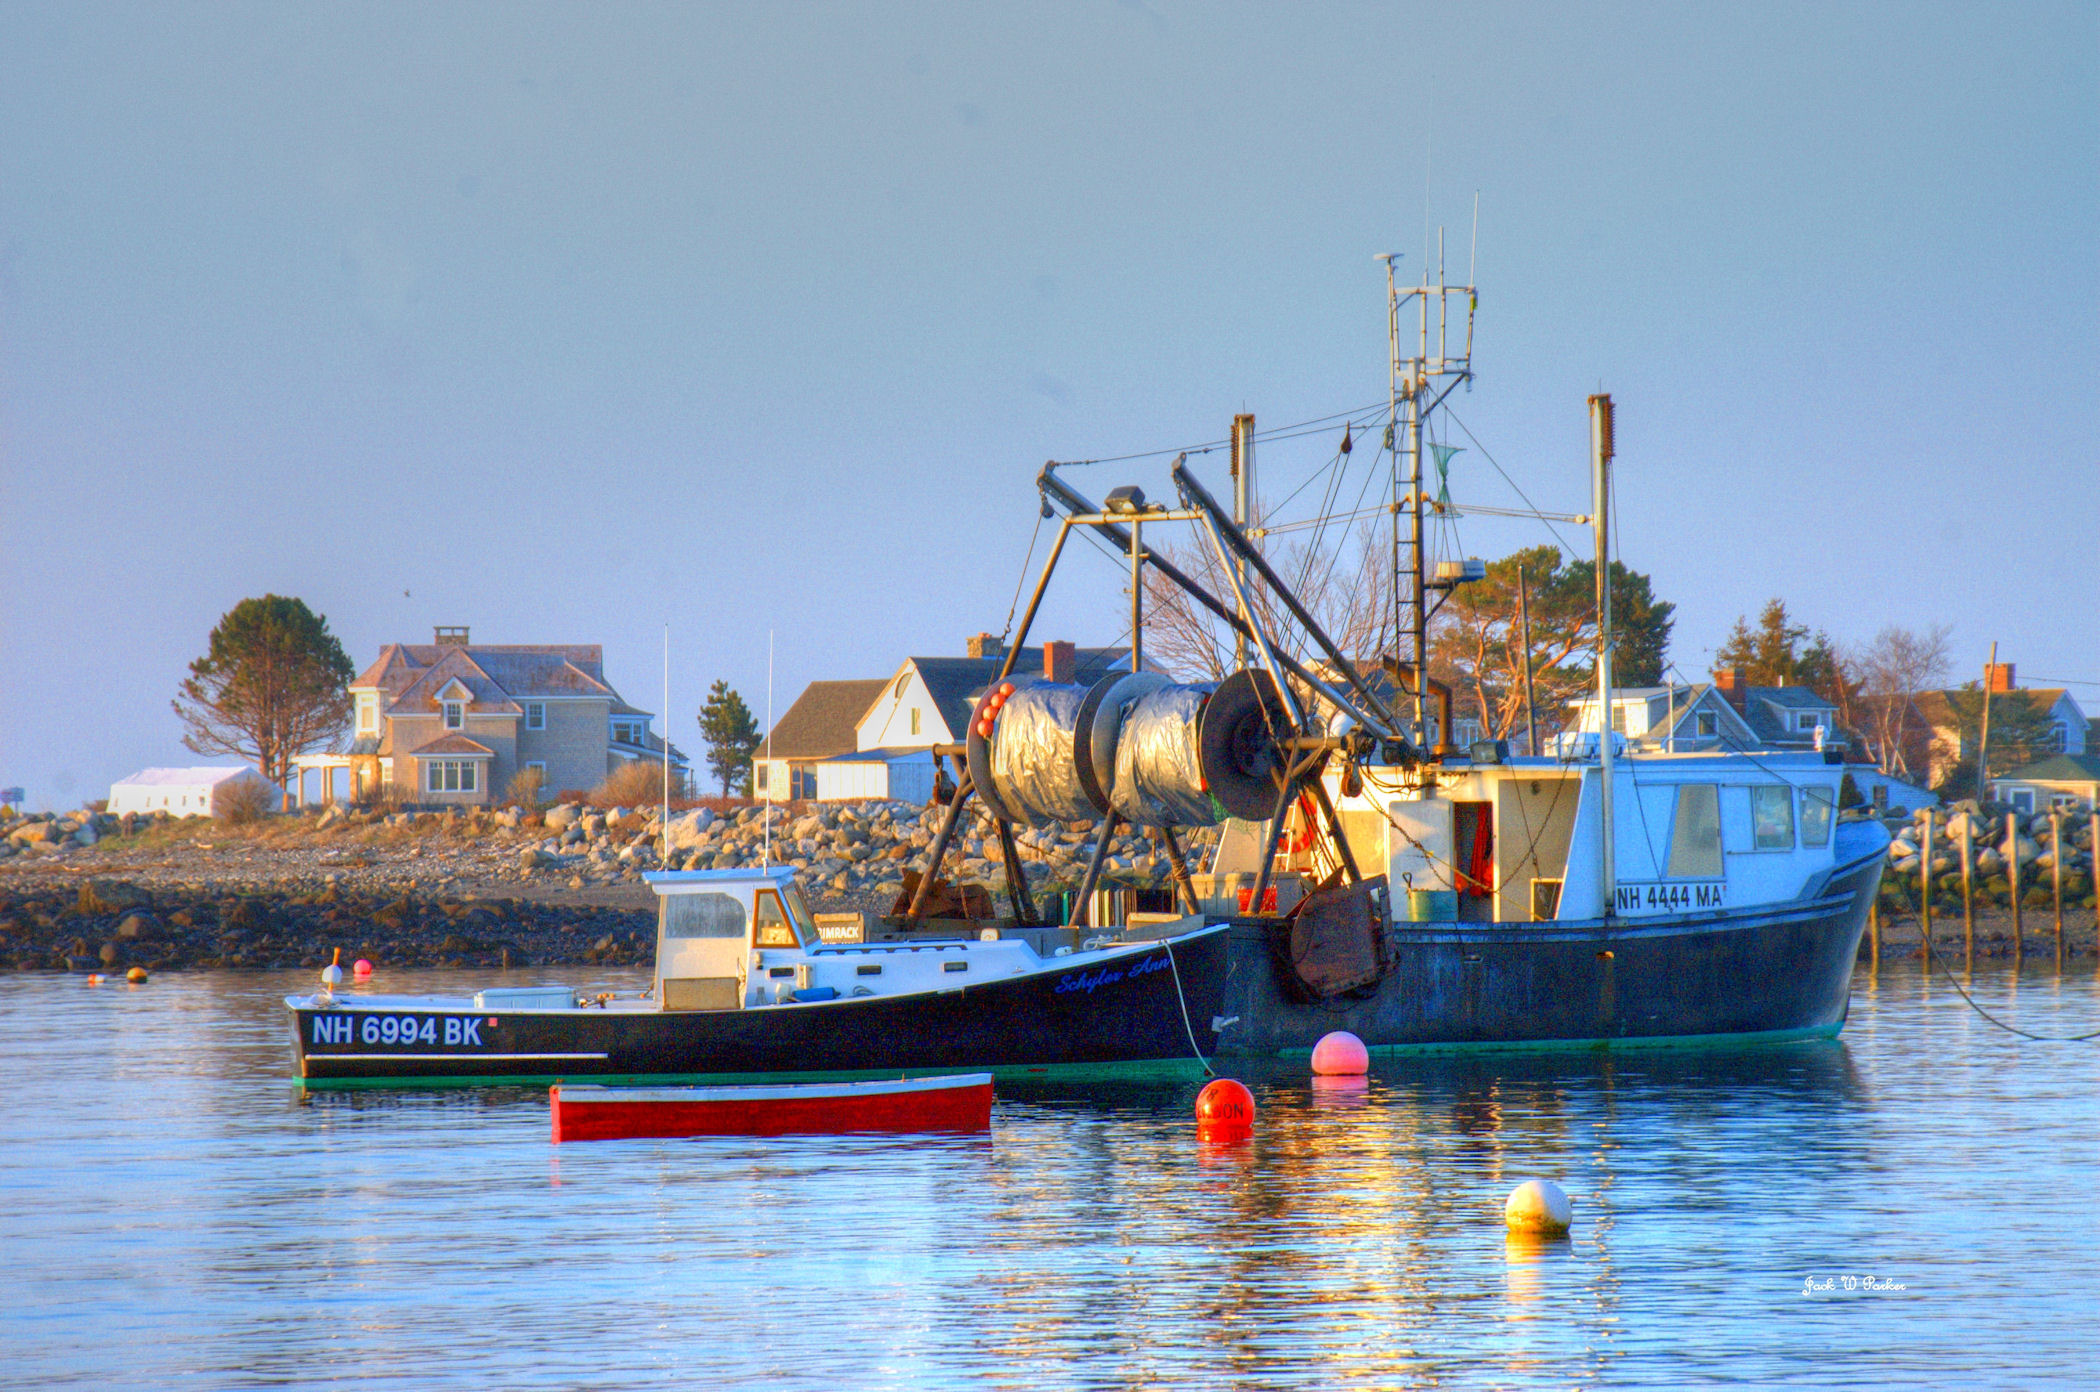 Trawler At Rest (user submitted)